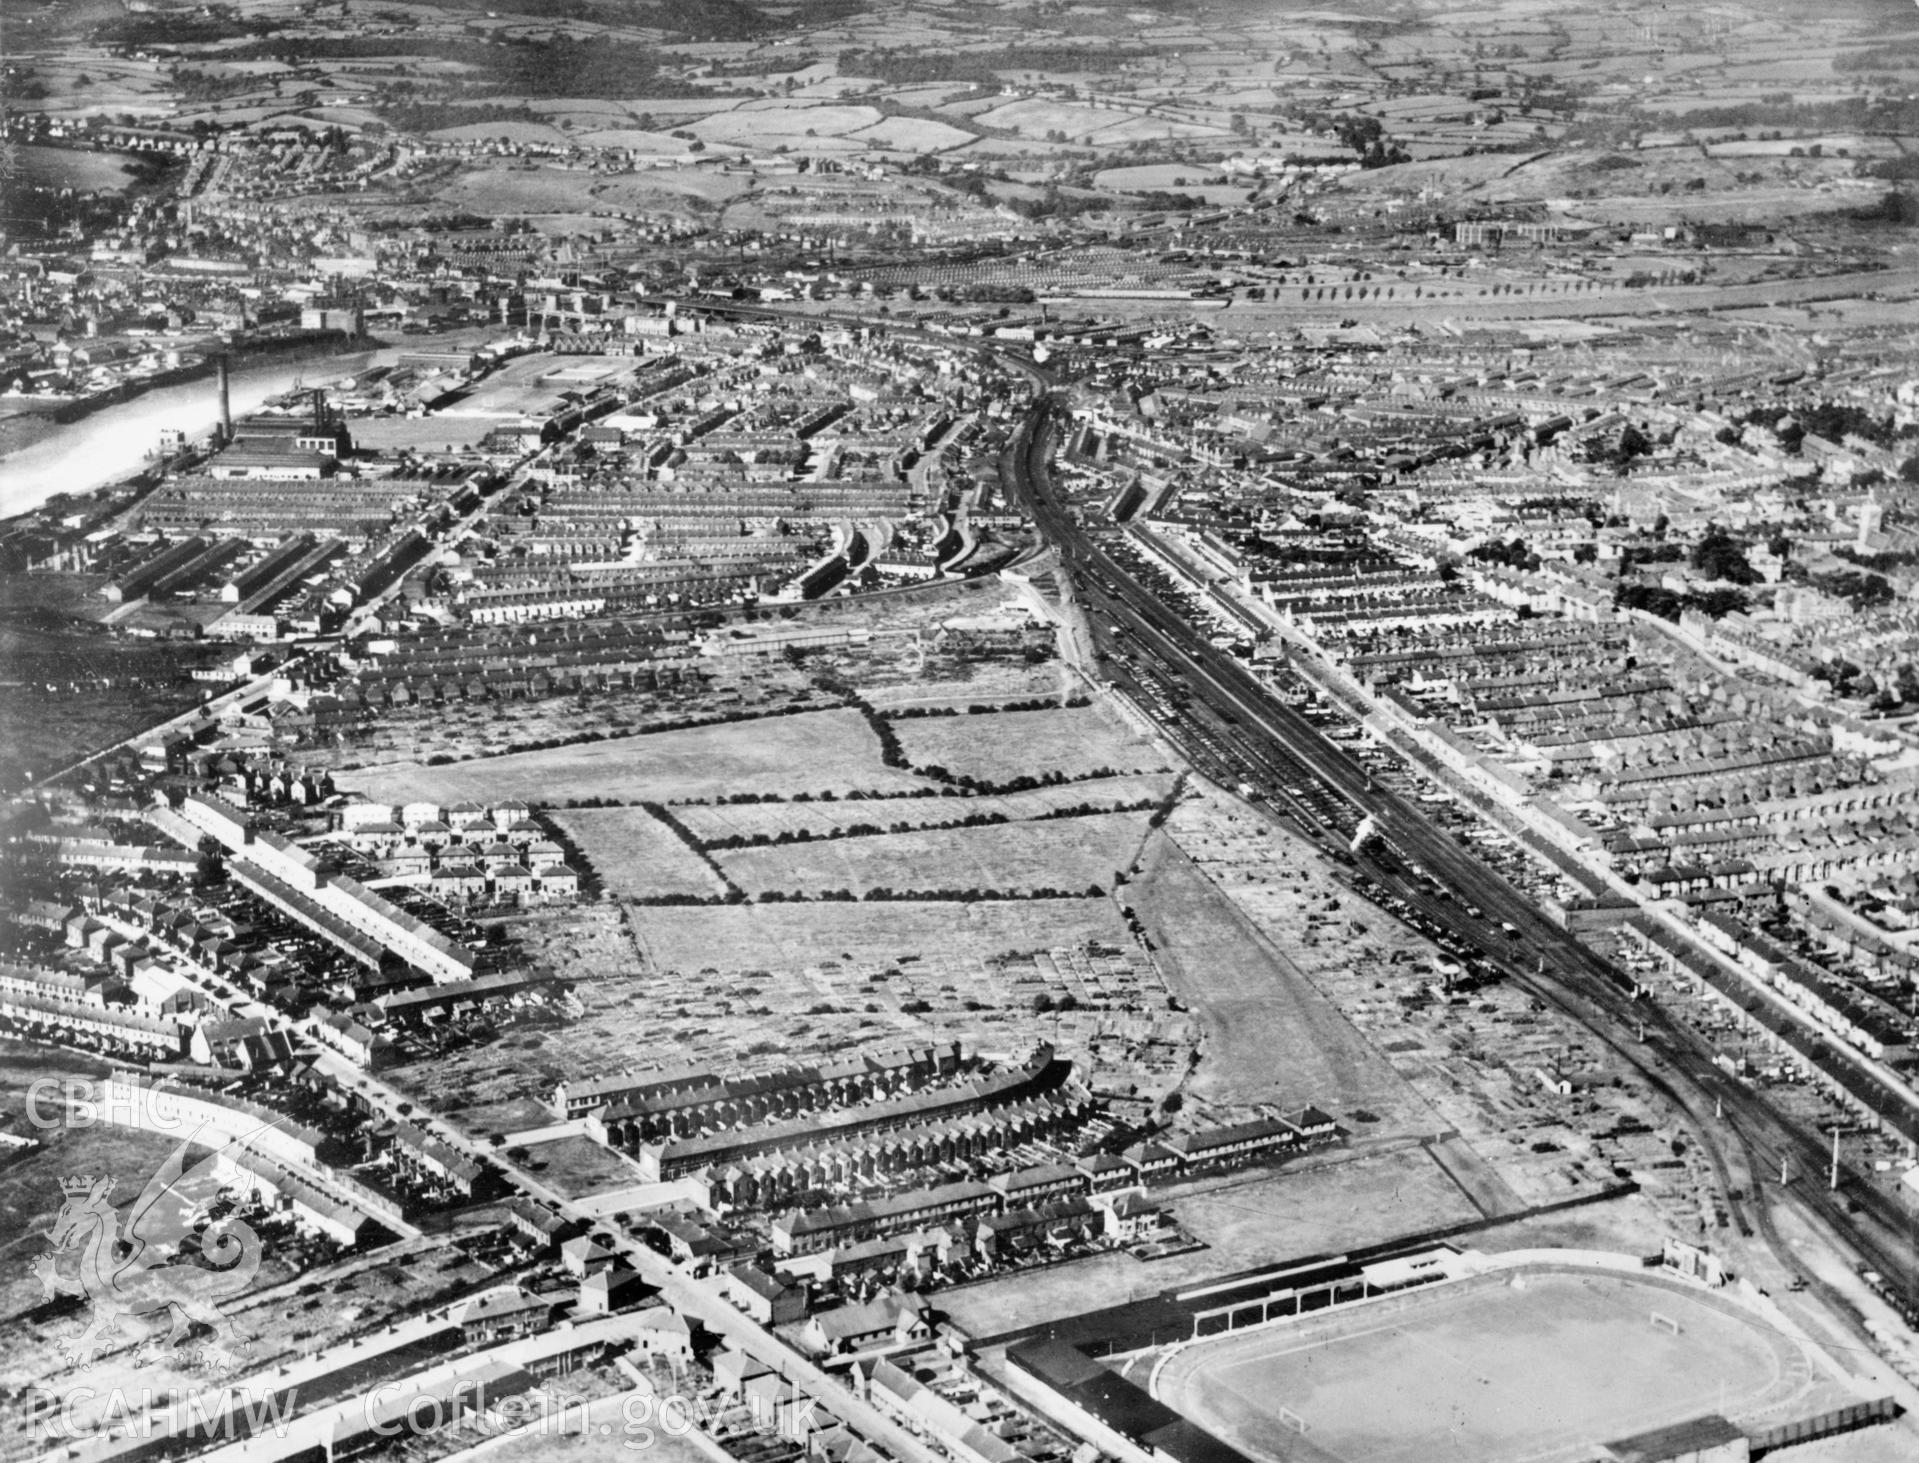 View of Newport showing Somerton Park football stadium. Oblique aerial photograph, 5?x4? BW glass plate.